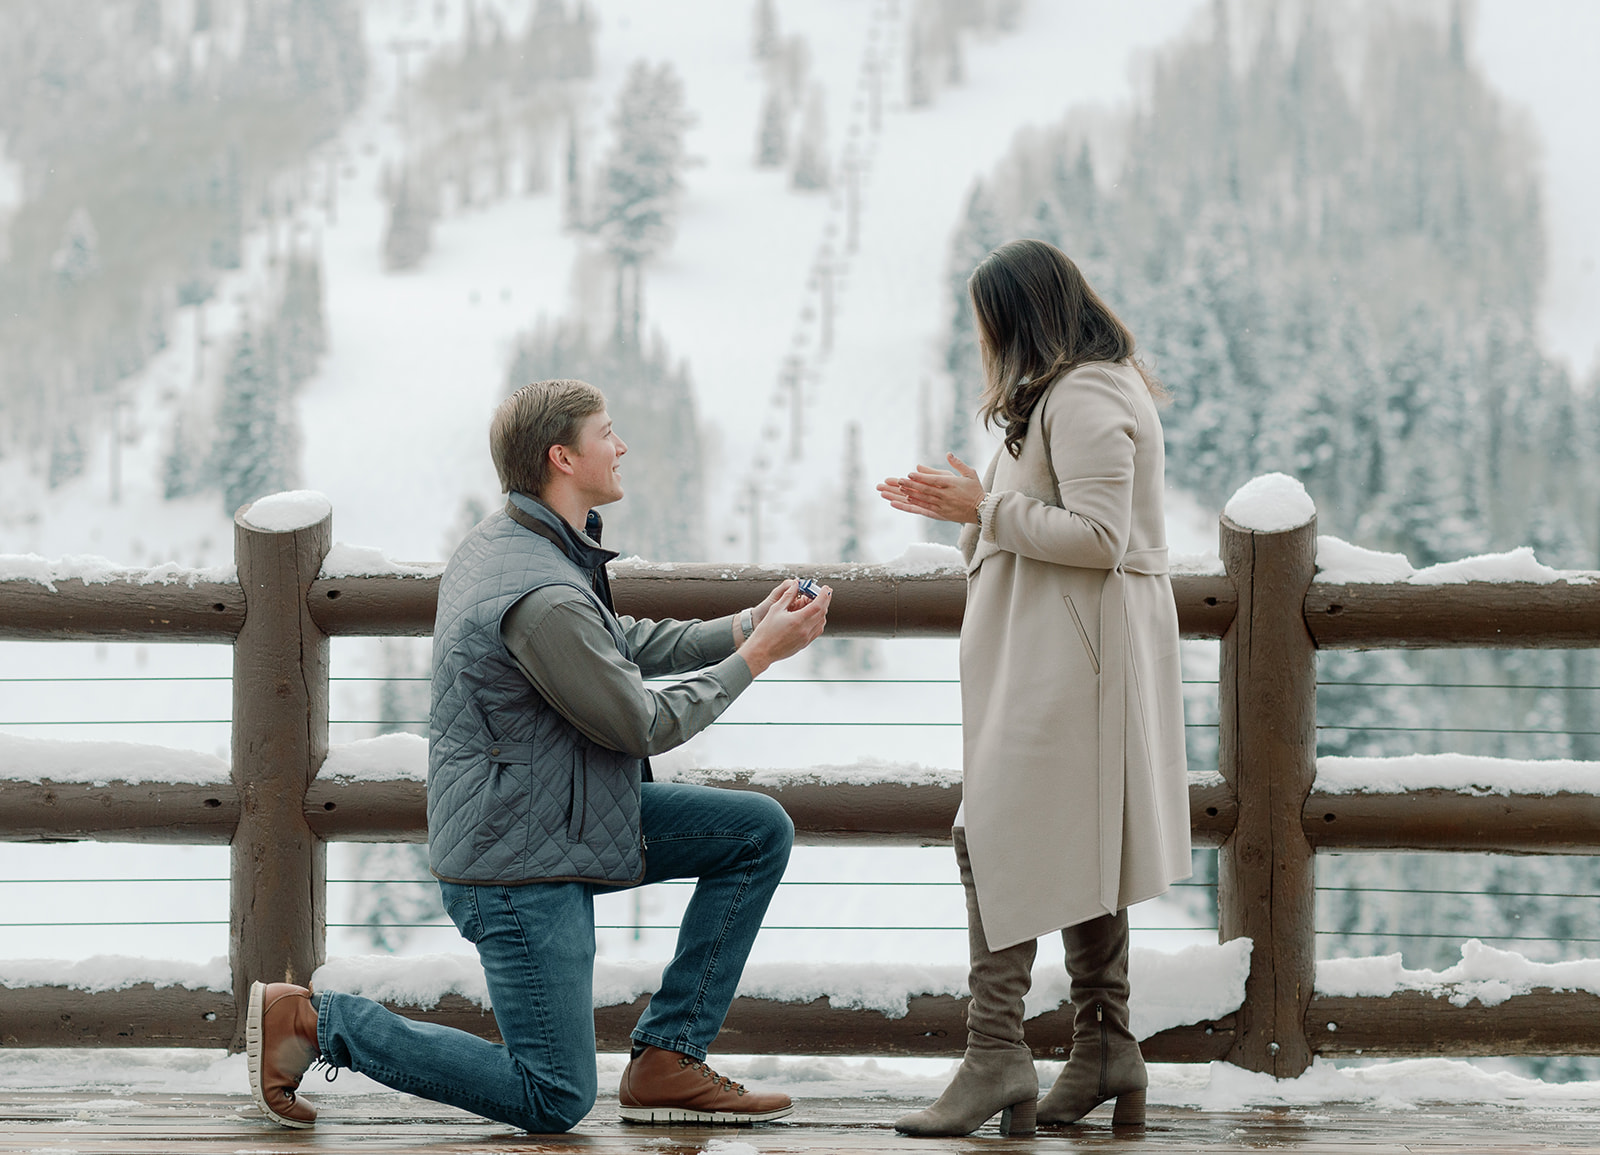 A white male down one knee getting with a ring in his hand. The male has dirty blonde hair and is looking up at his soon to be fiance. He is down on knee proposing to the brunette female. The female is wearing a tan peacoat and is looking down with her hands out in full surprise on her marriage proposal. The scenery in the background are beautiful snowy mountains. The couple had a beautiful proposal at Stein Eriksen Lodge, Deer Valley. 